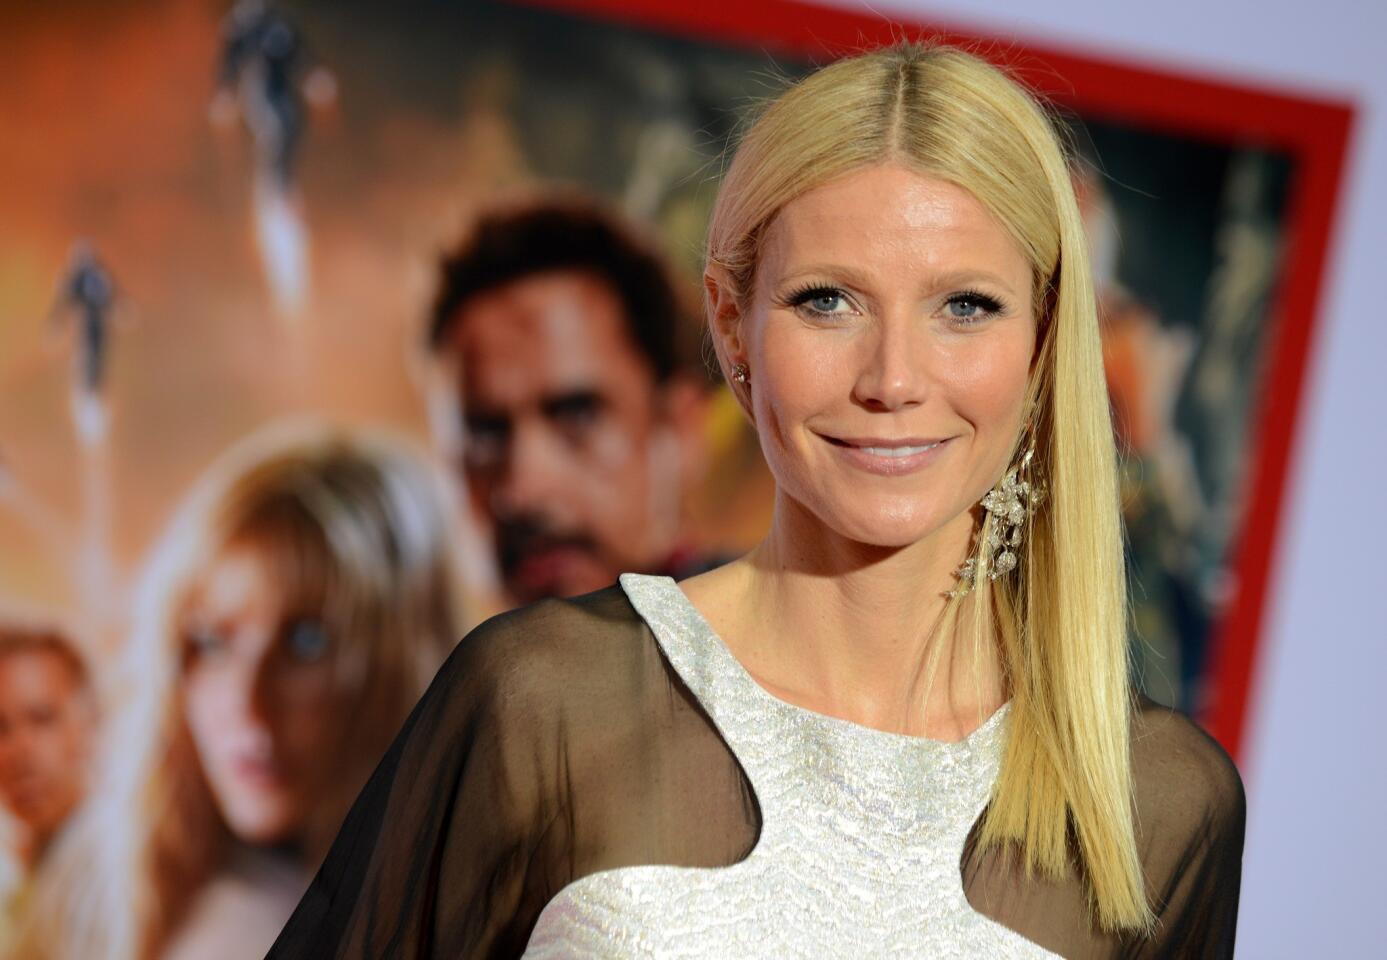 Gwyneth Paltrow named People's most beautiful woman